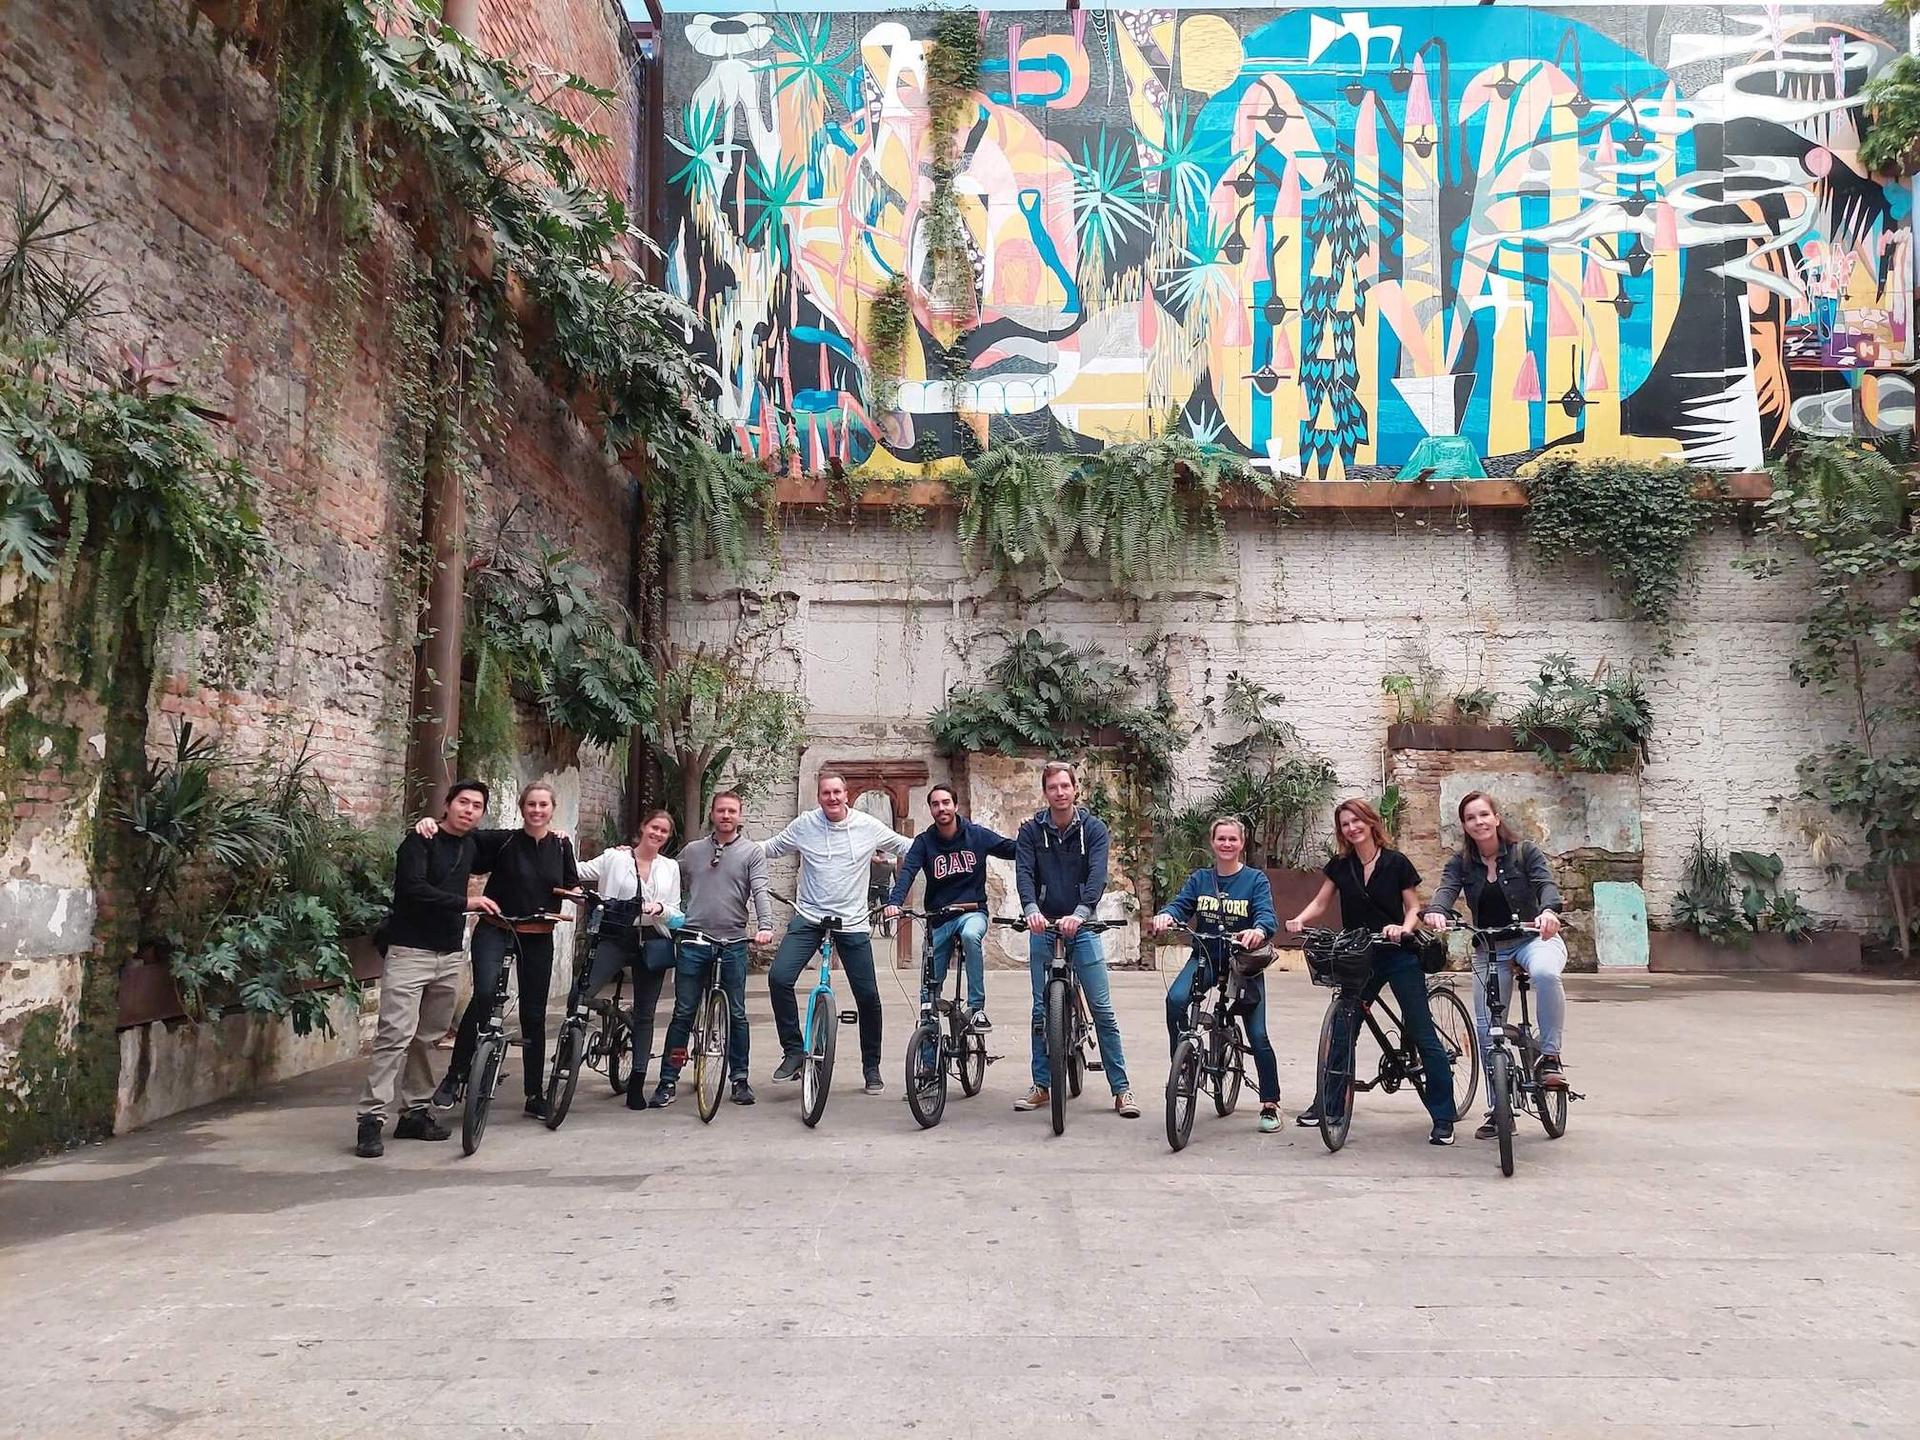 Group of Bikers on a Bike Tour in Mexico City